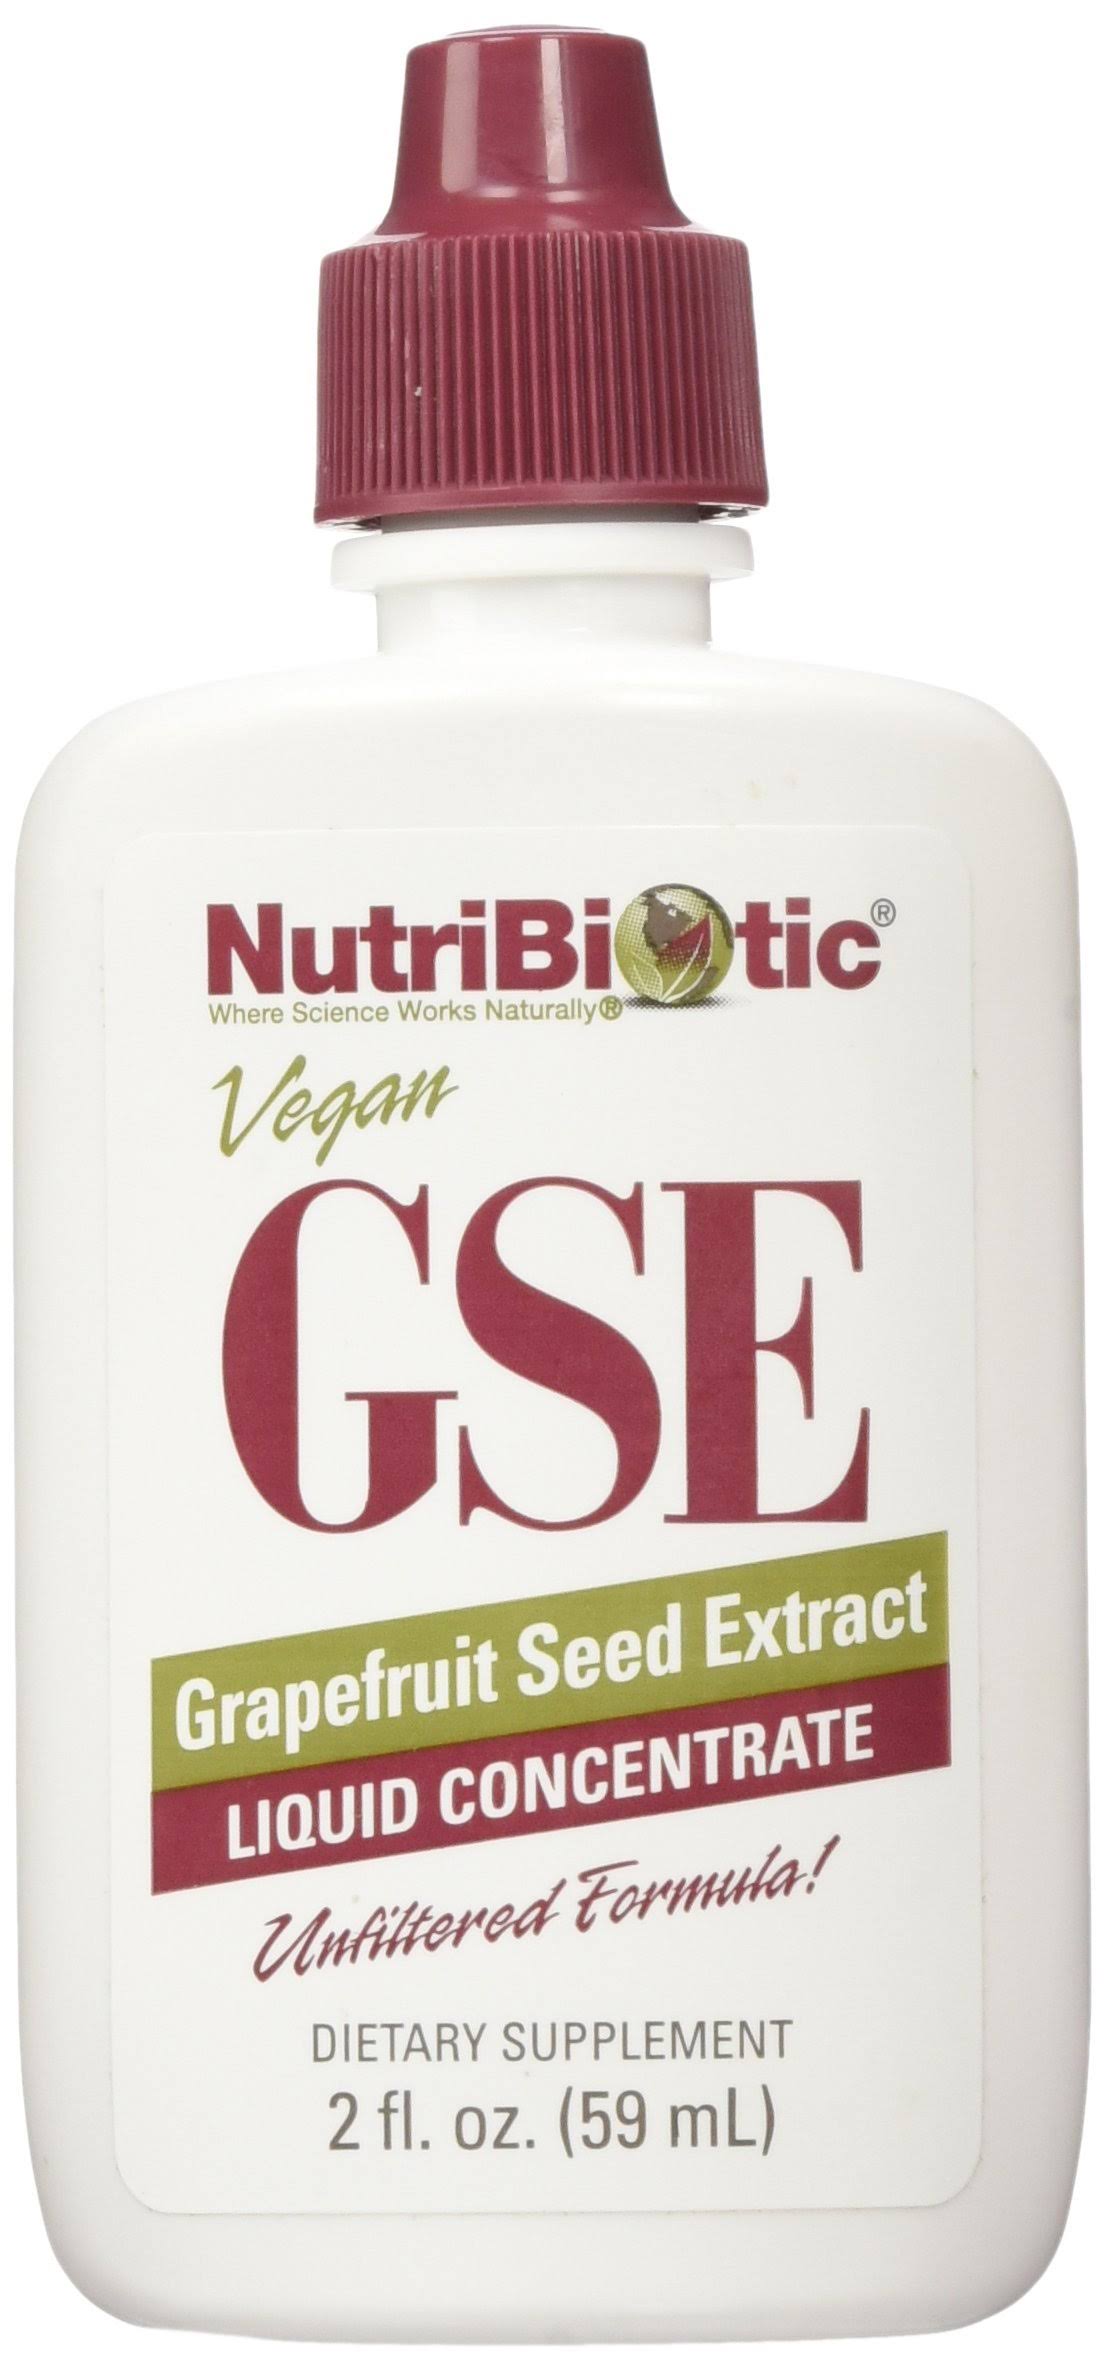 NutriBiotic GSE Liquid Concentrate - Grapefruit Seed Extract